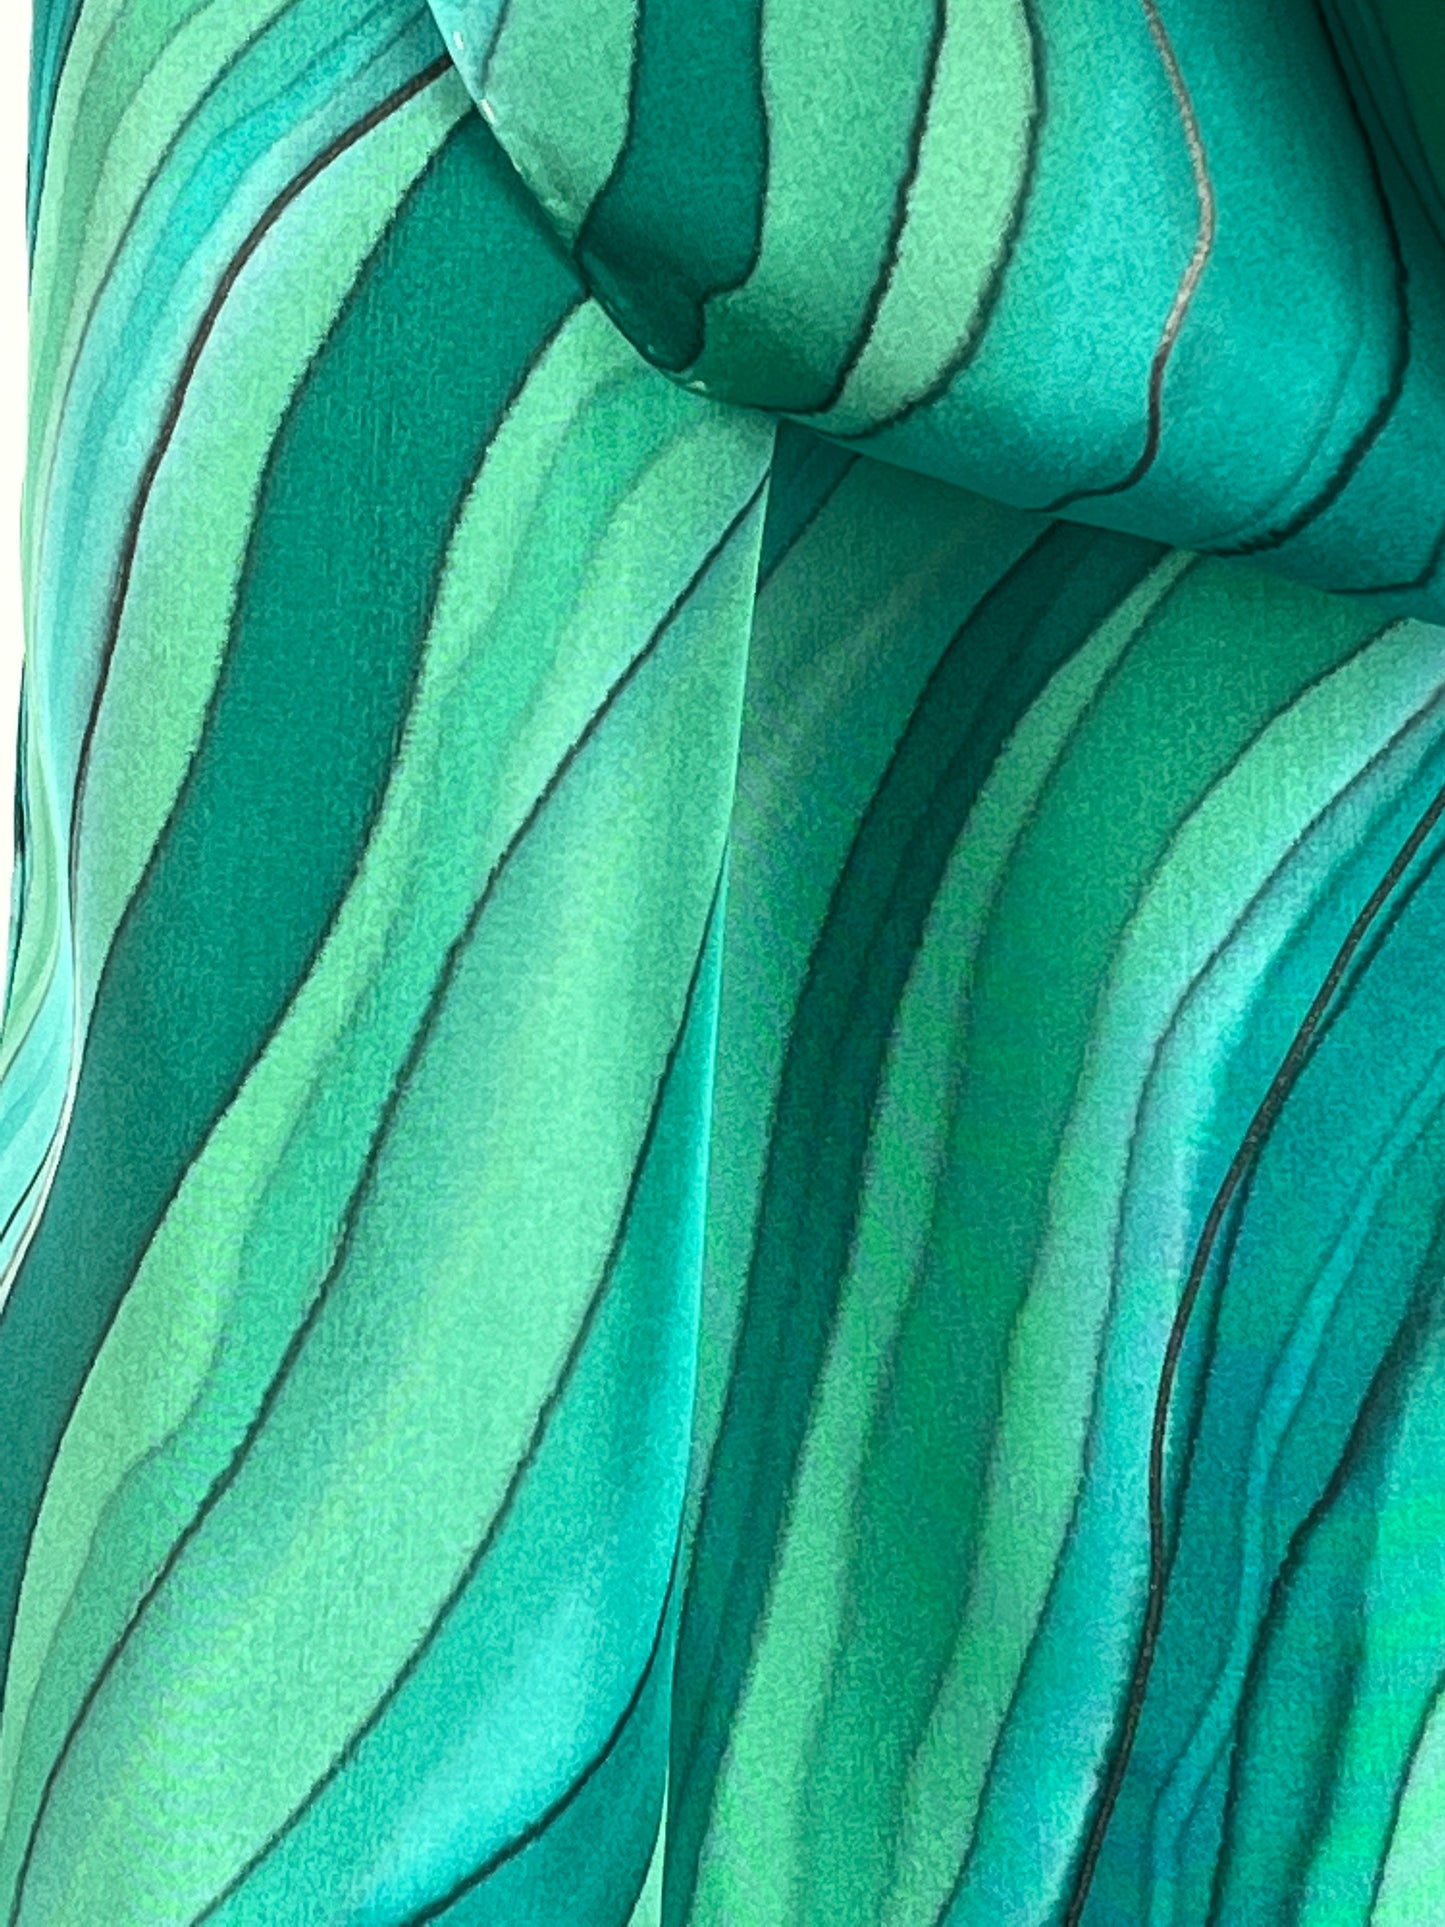 “Magnificent Malachite" - Hand-dyed Silk Scarf - $125